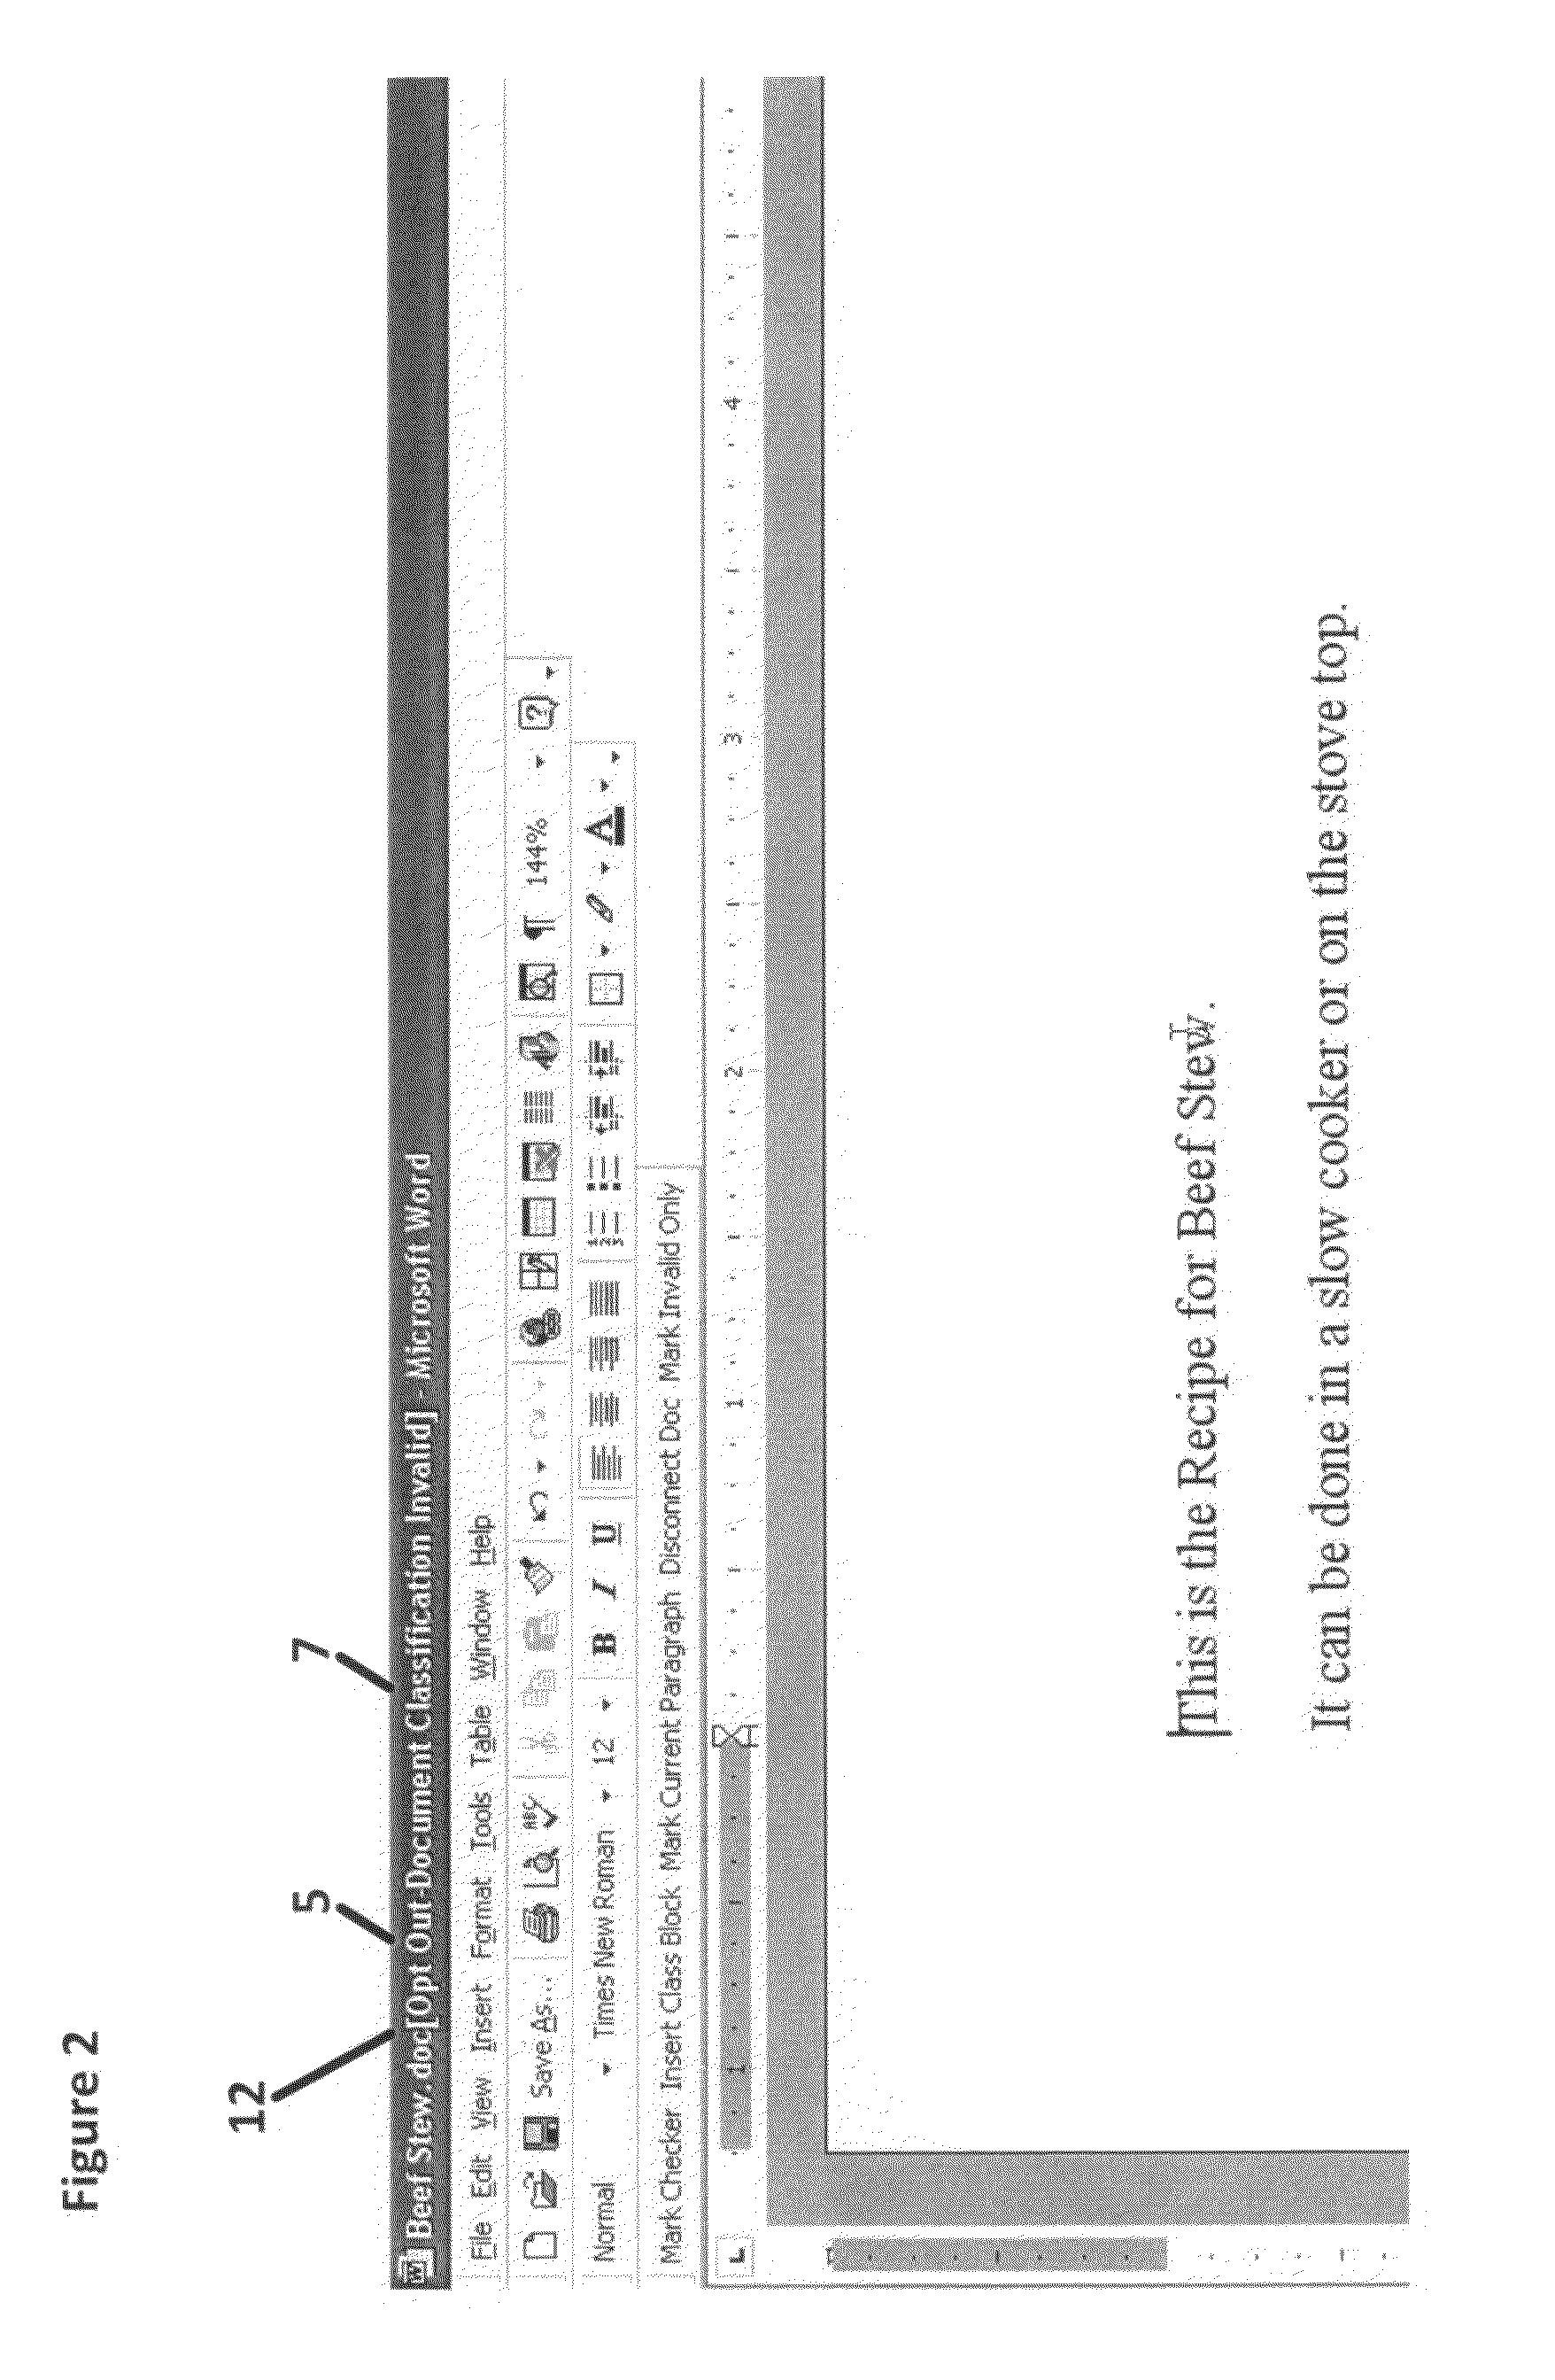 System or method to assist and automate an information security classification and marking process for government and non-government organizations for information of an electronic document